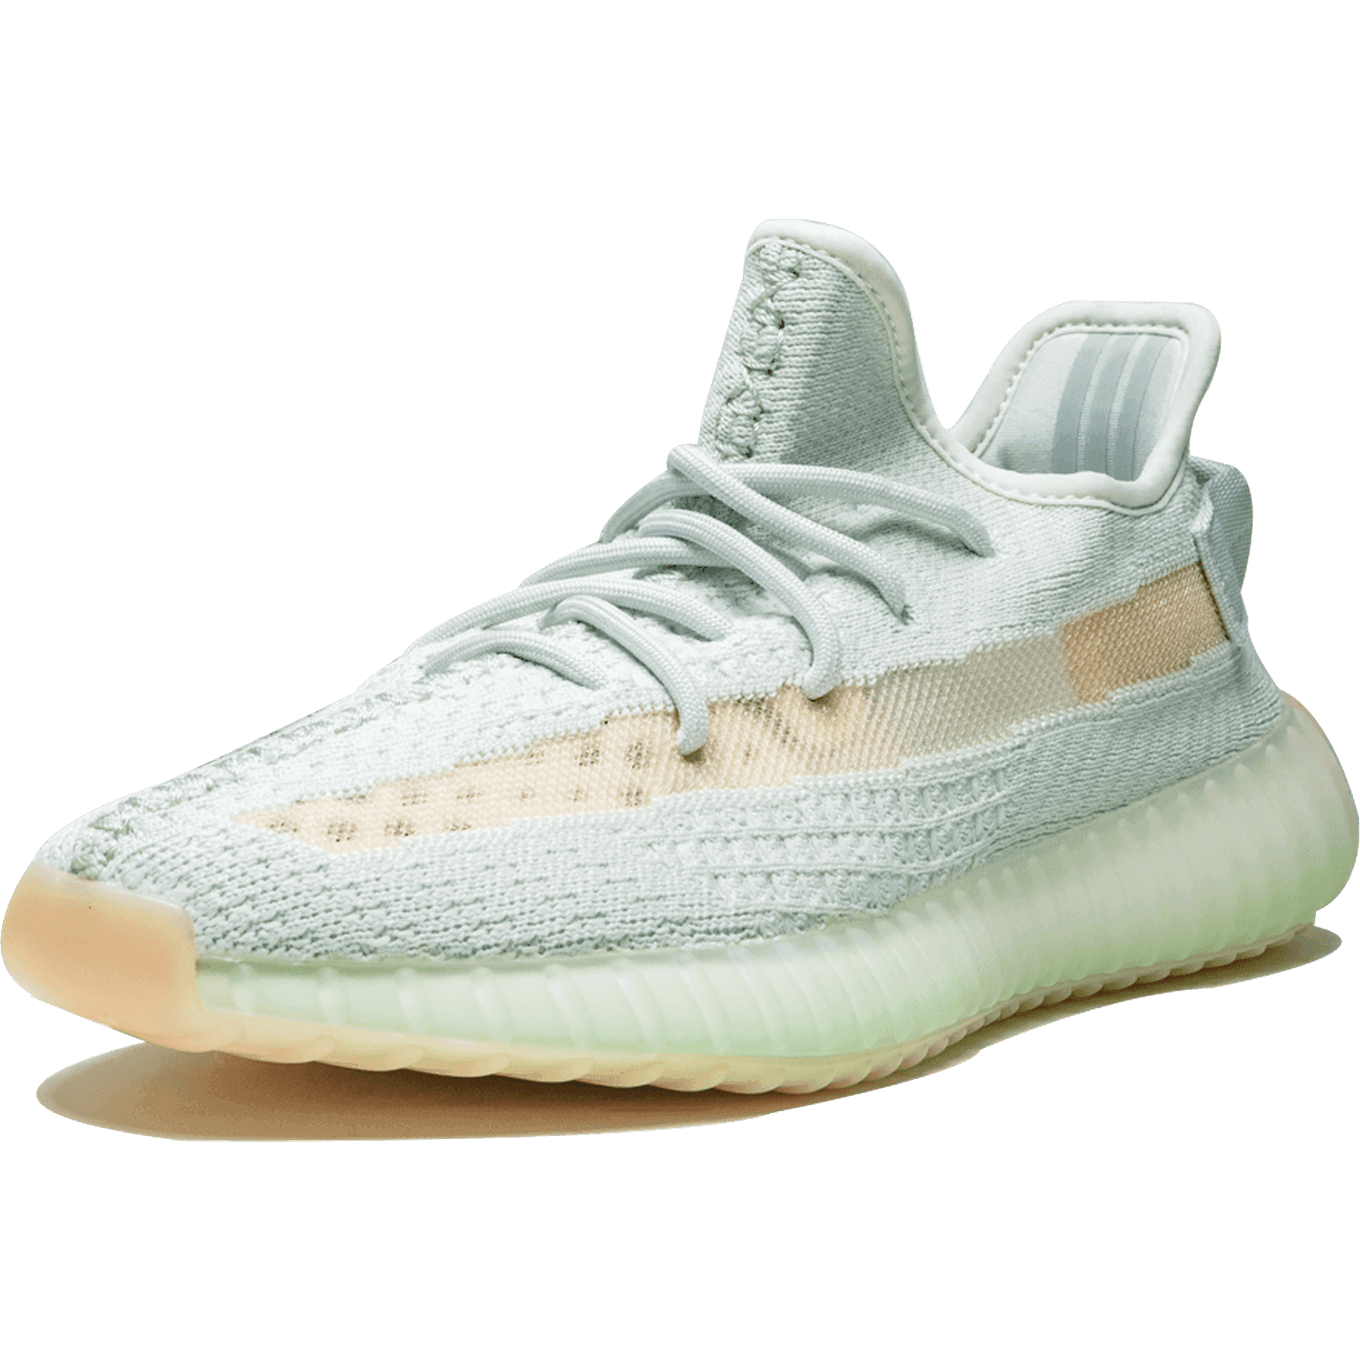 Adidas YEEZY Boost 350 V2 Hyperspace